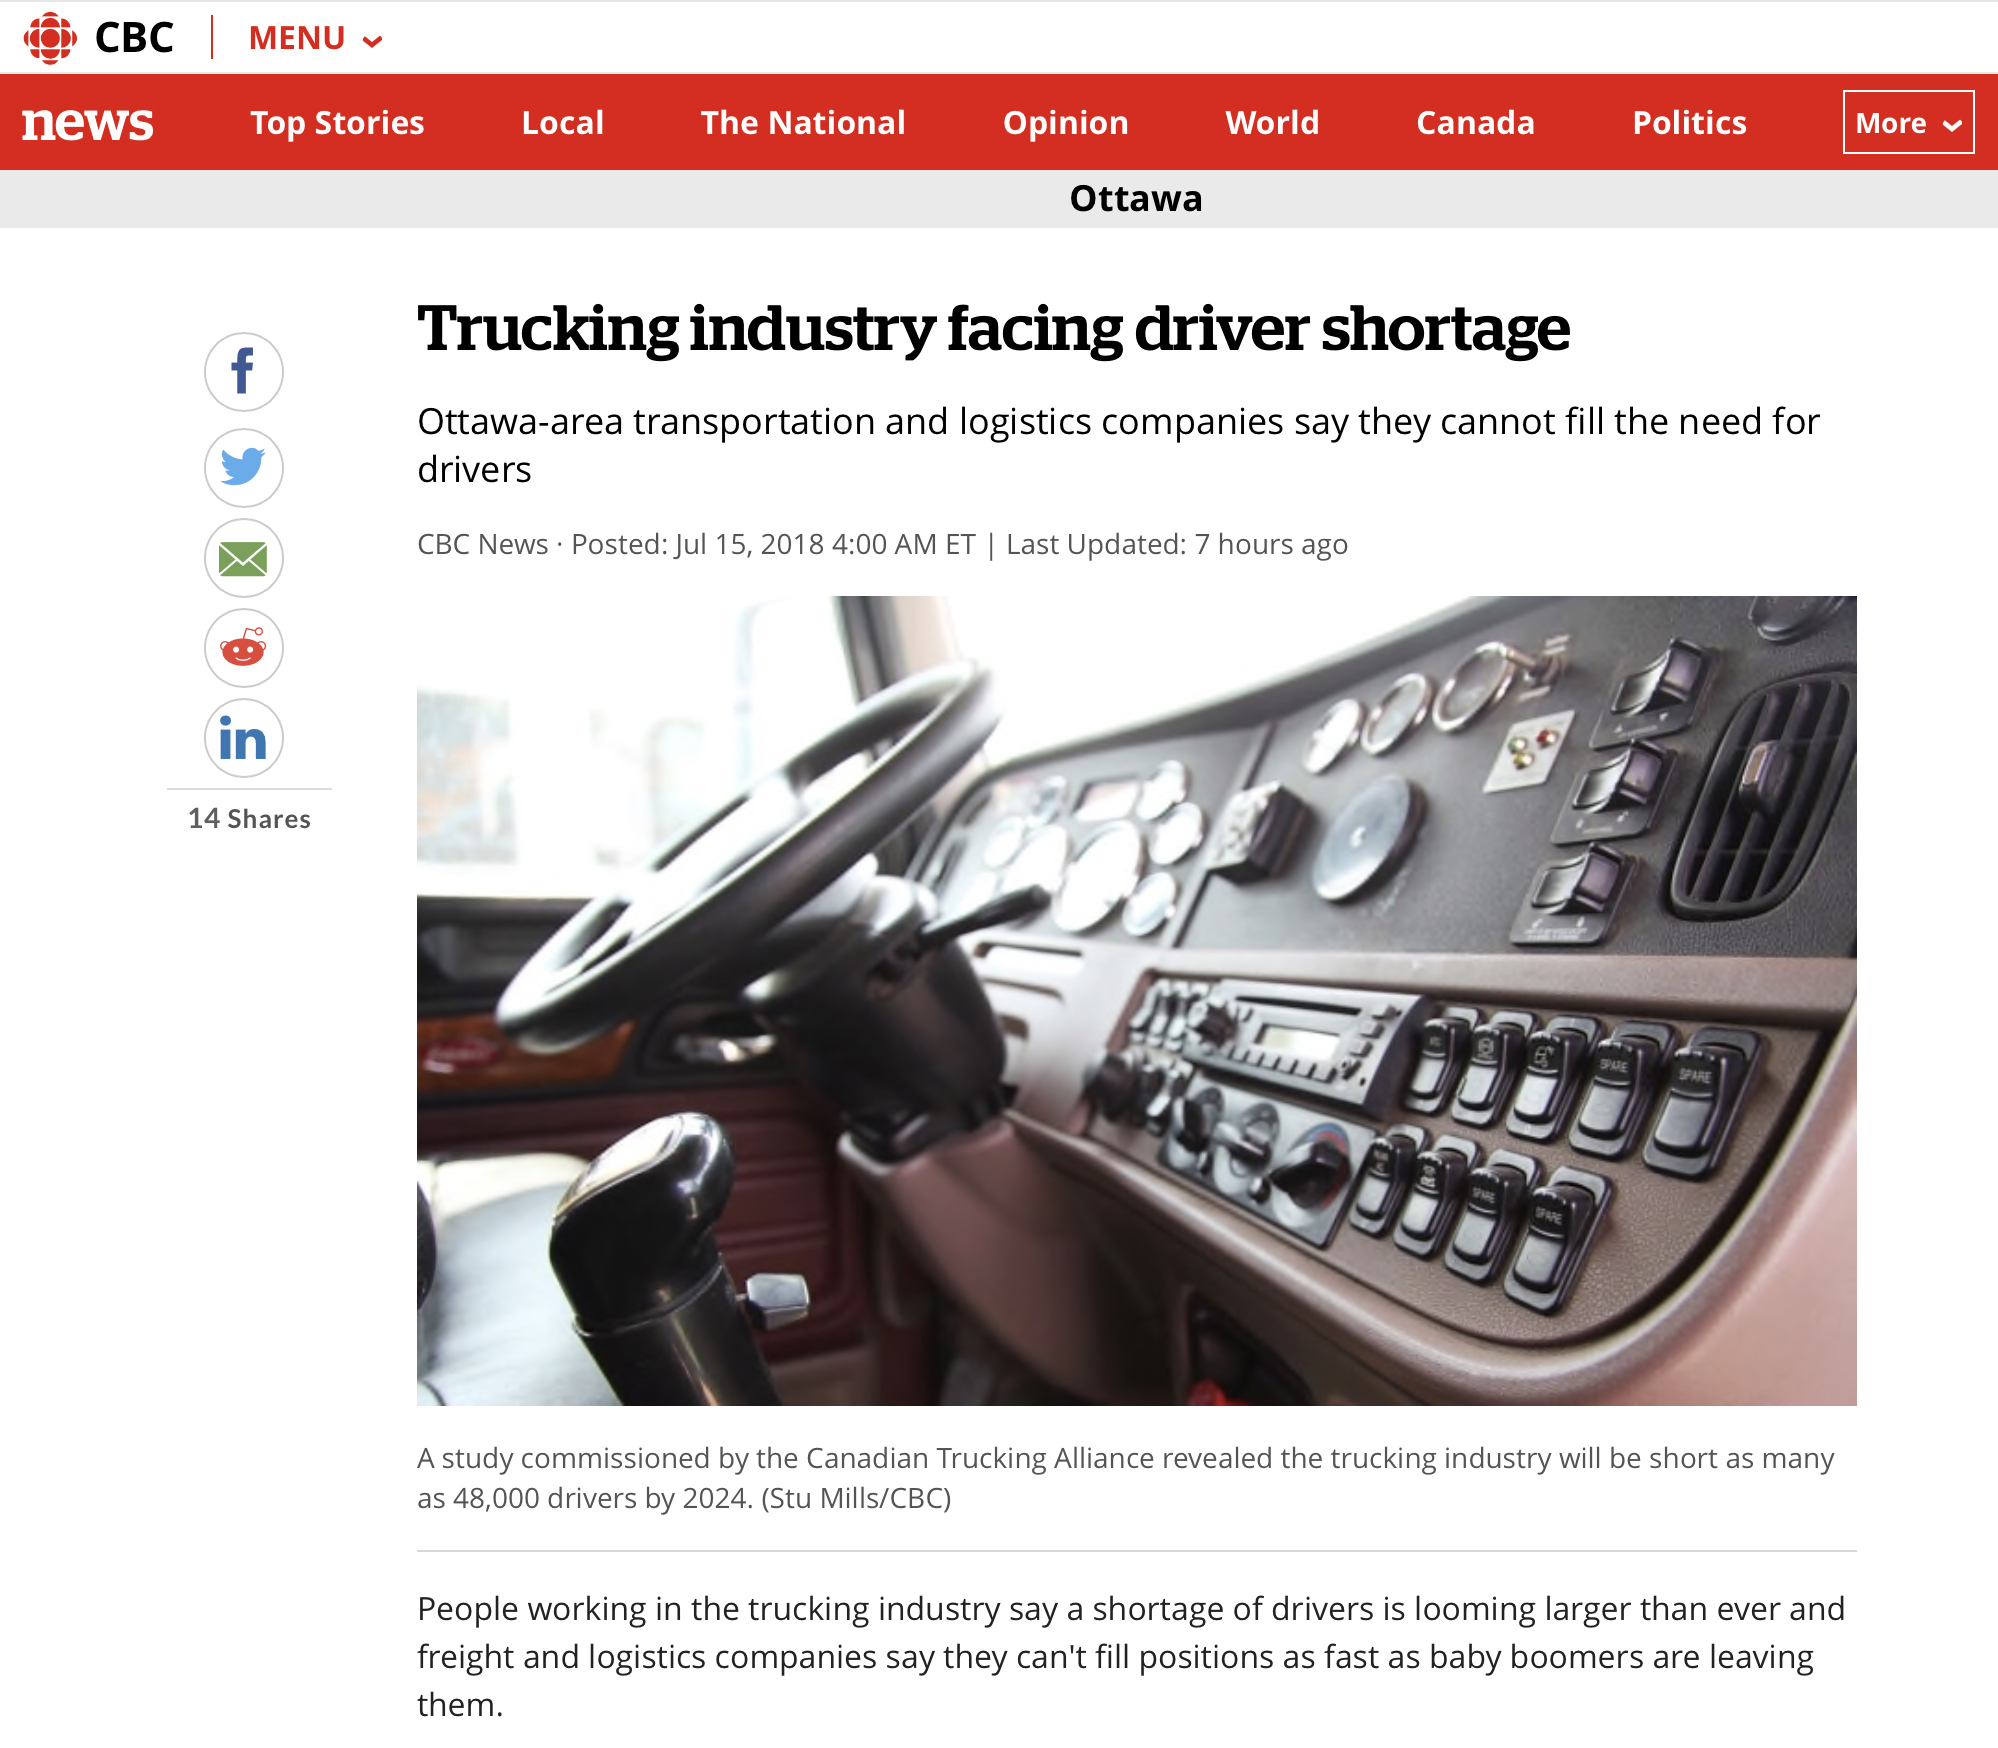 CBC News: Trucking industry facing driver shortage